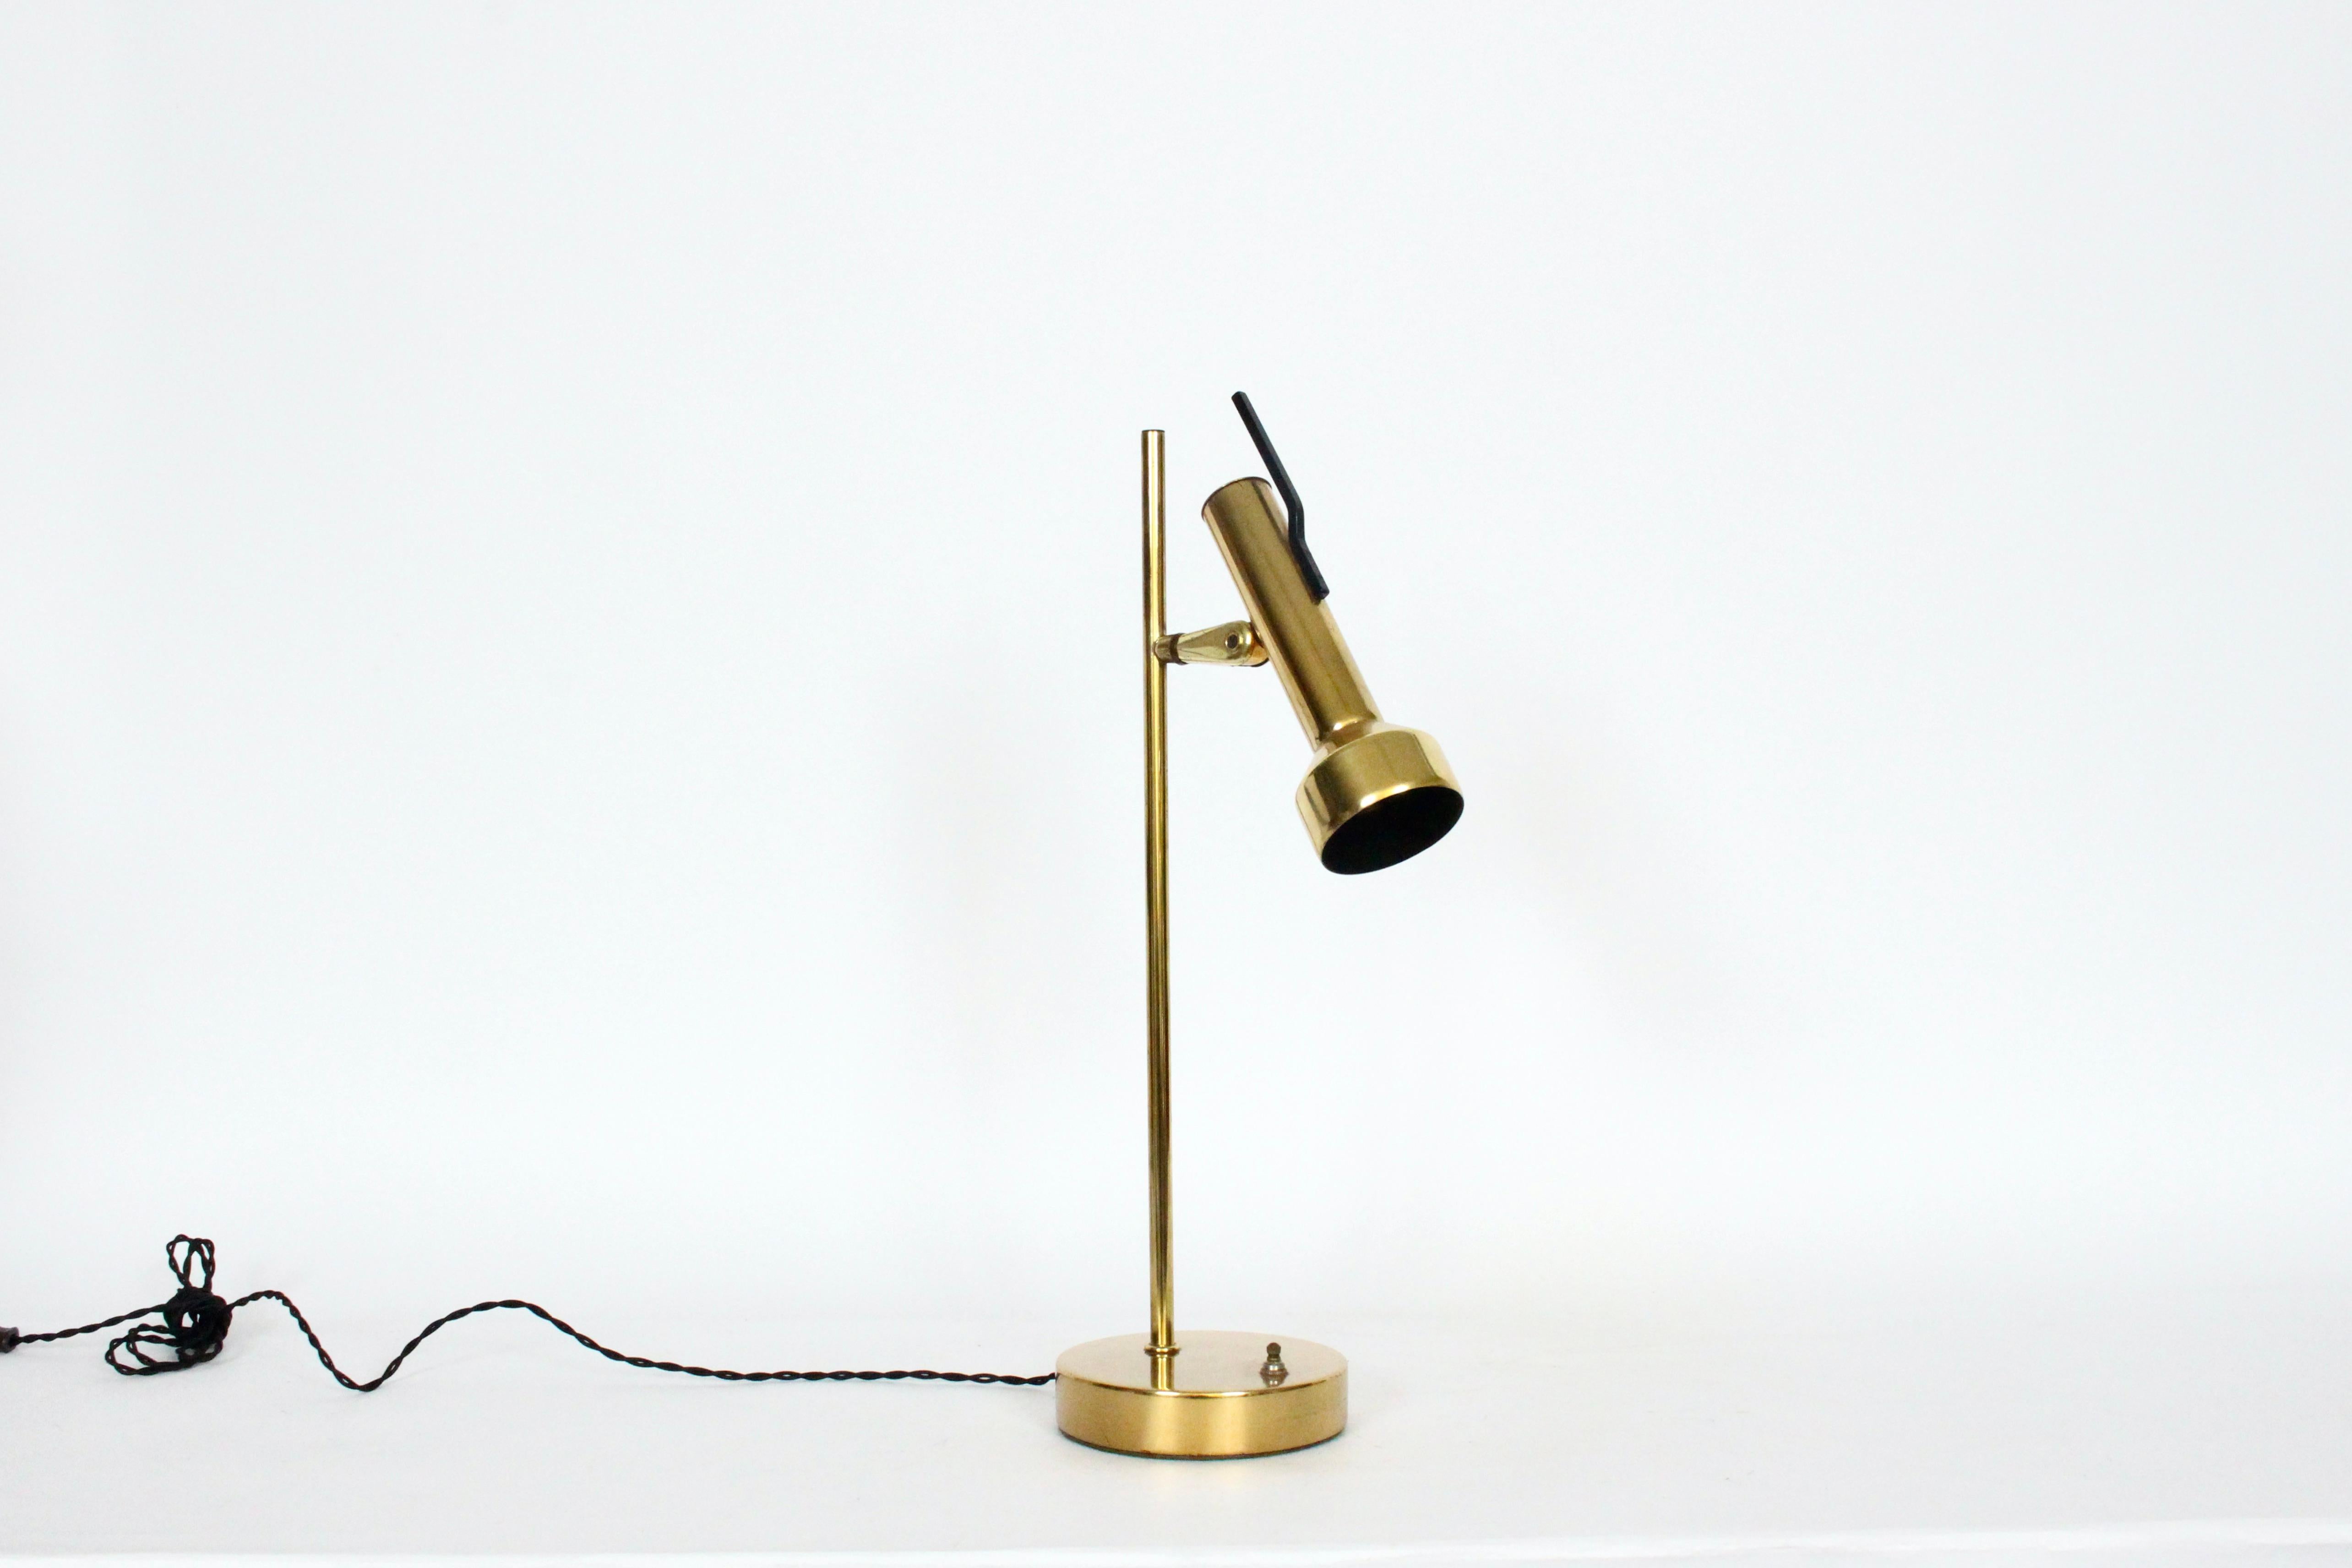 American Mid-Century Modern Gerald Thurston for Lightolier style brass desk lamp.  Featuring a slender, sturdy Brass plated tubular stem, round balanced, weighted 6D base, turn switch to base, adjusting Black enameled interior Brass shade head (8.25